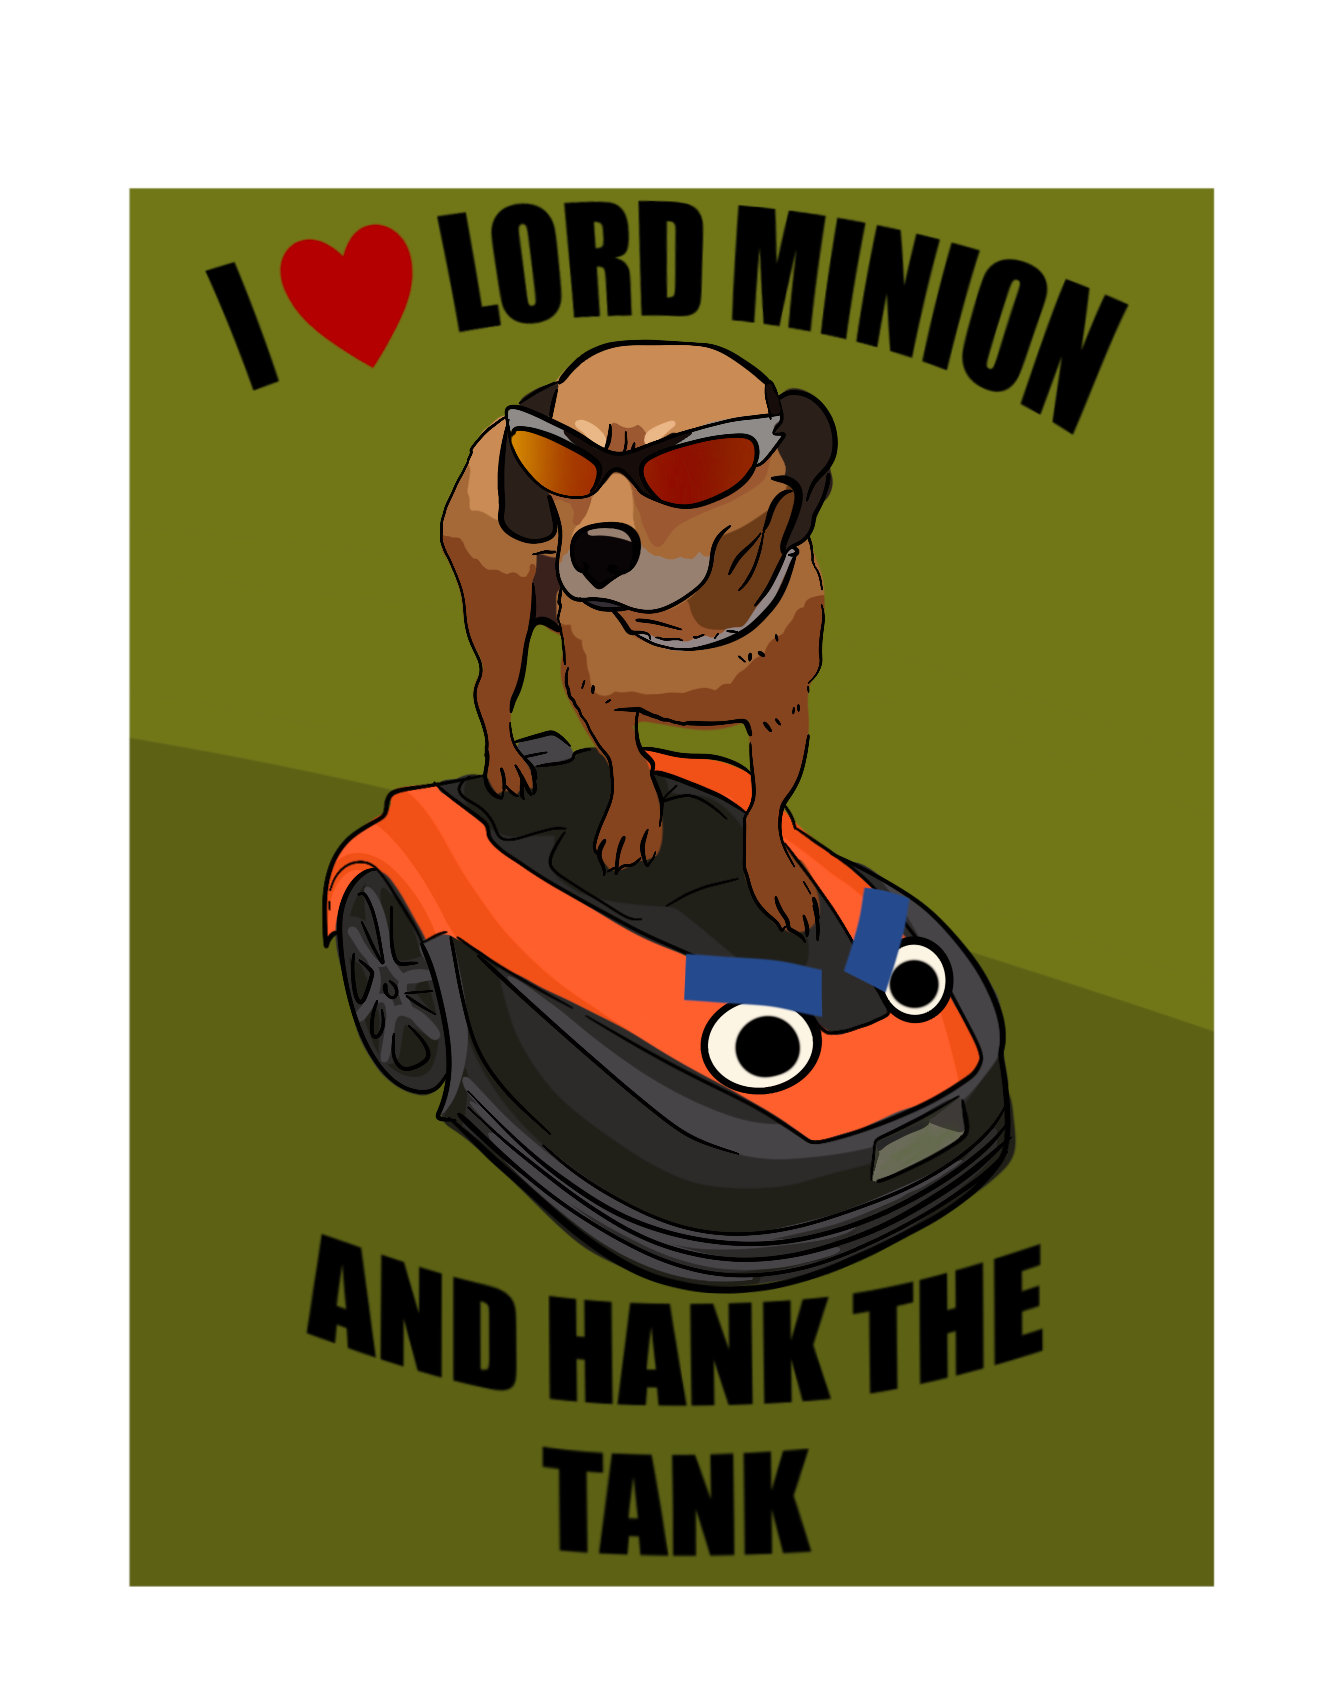 Sticker - I Love Lord Minion and Hank the Tank